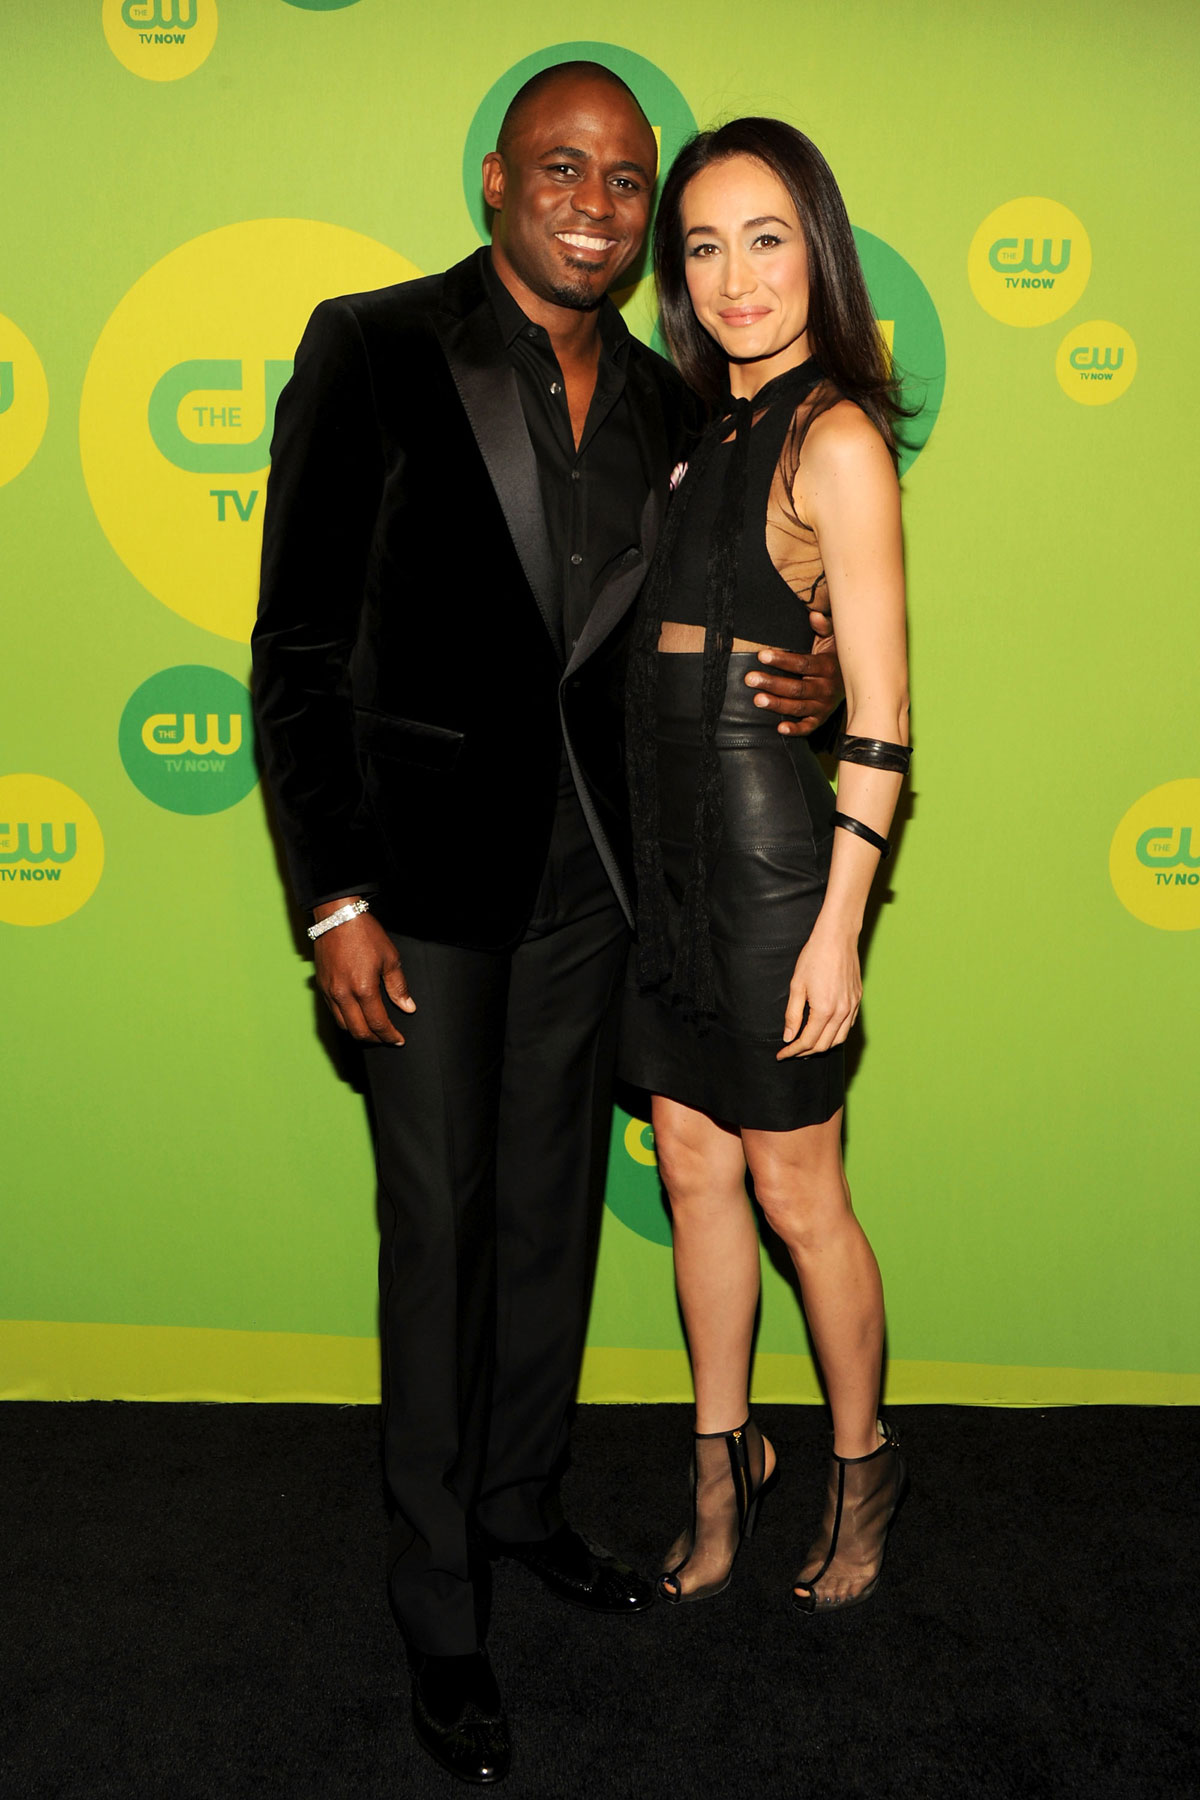 Maggie Q attends The CW Network’s New York 2013 Upfront